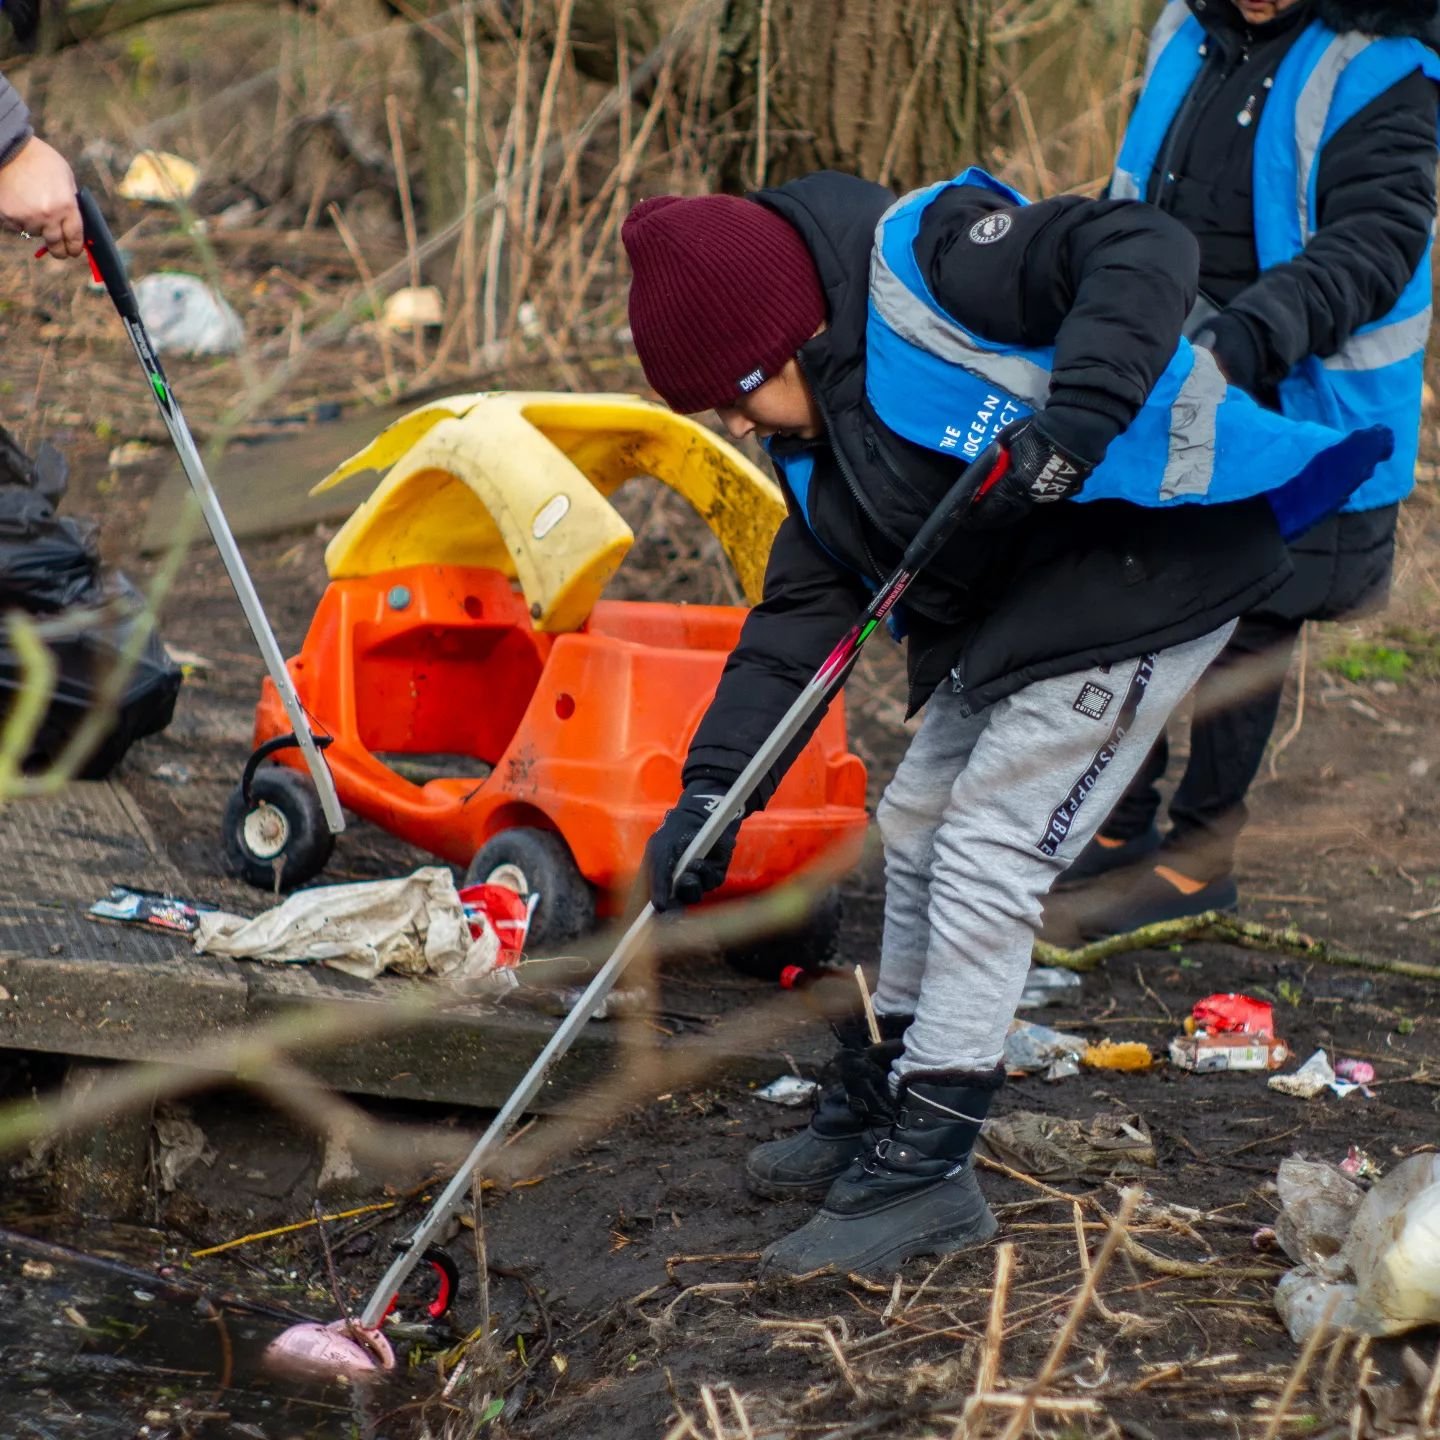 Continuing to clean up the mess along the river Soar and prevent even more plastic pollution decimating our precious waterways.

@uoceanleicester taking the lead in community conservation 👈👈👈👈